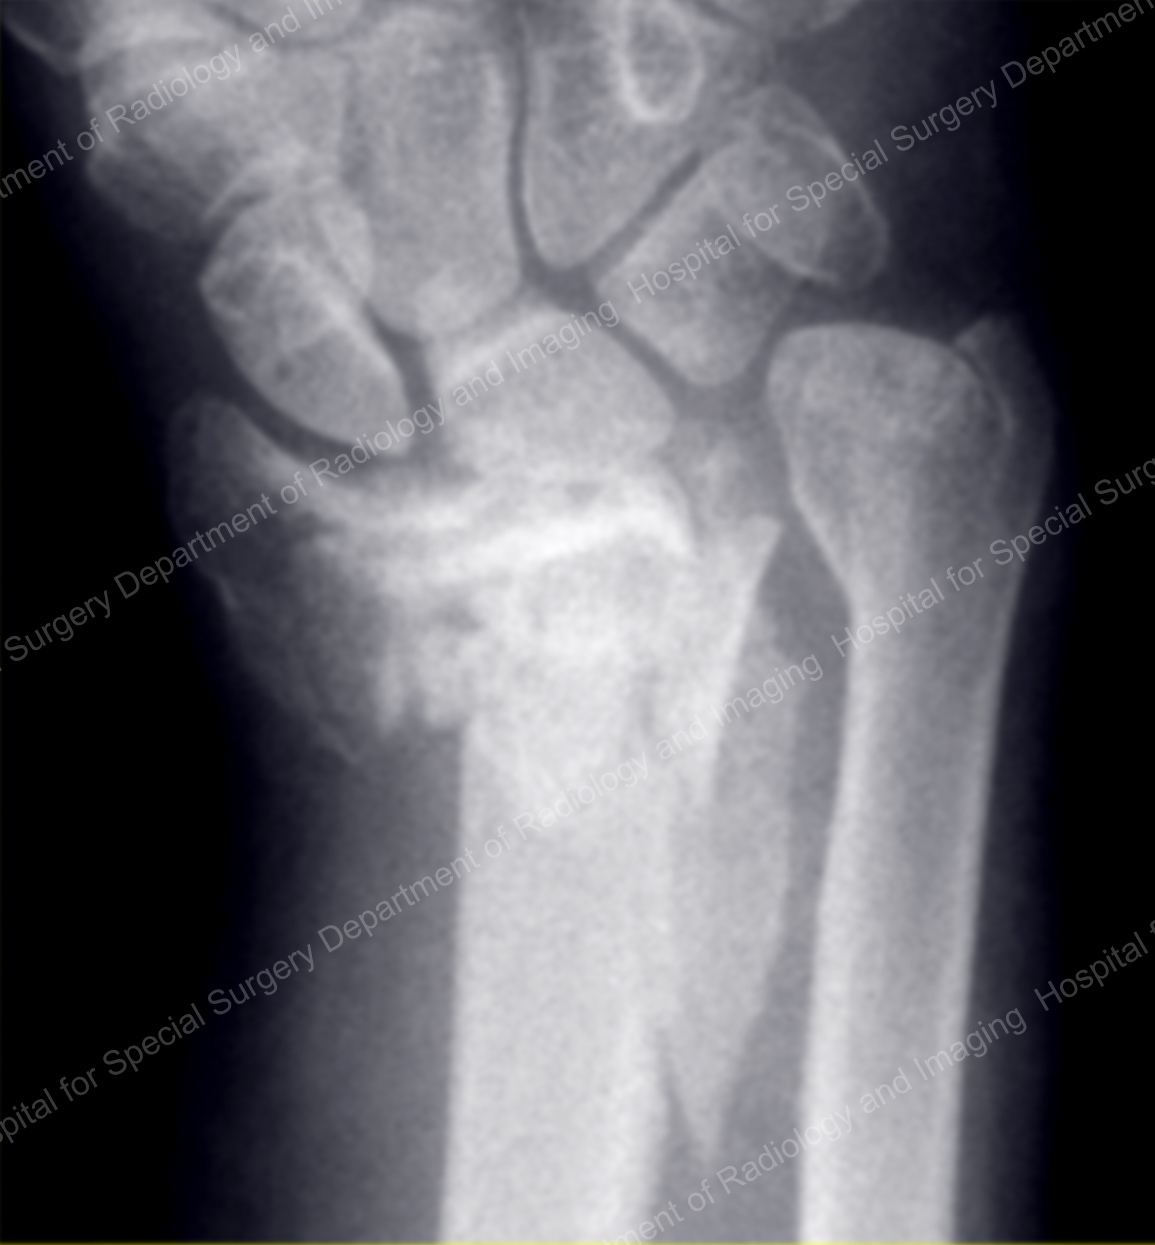 X-ray image showing a complex fracture of the distal radius